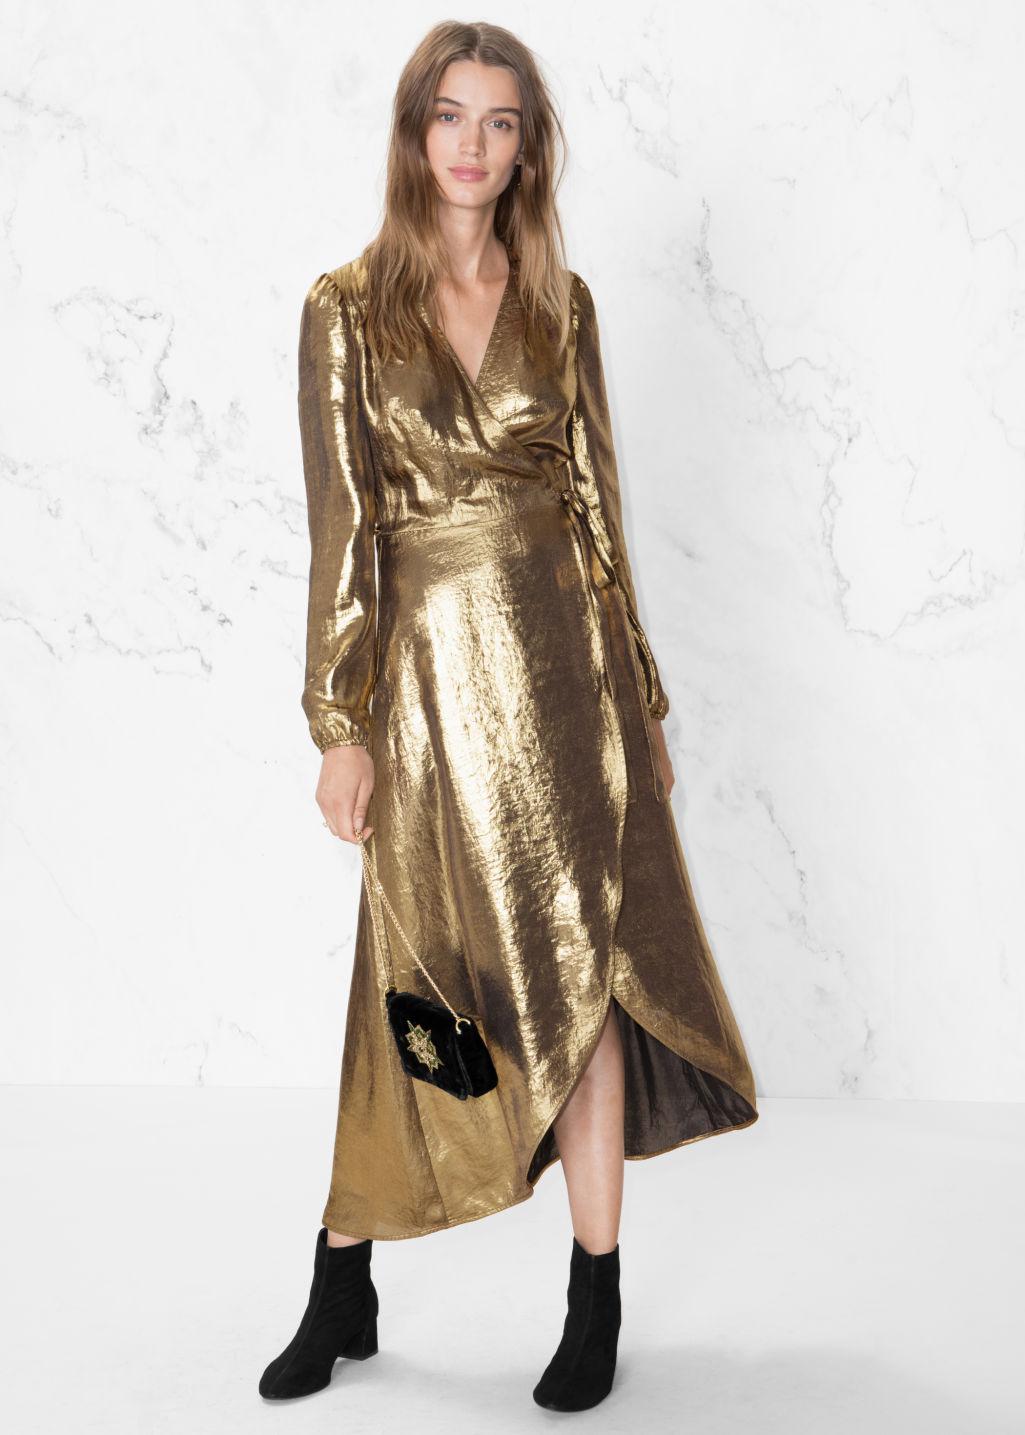 & Other Stories Wrap Dress in Metallic | Lyst